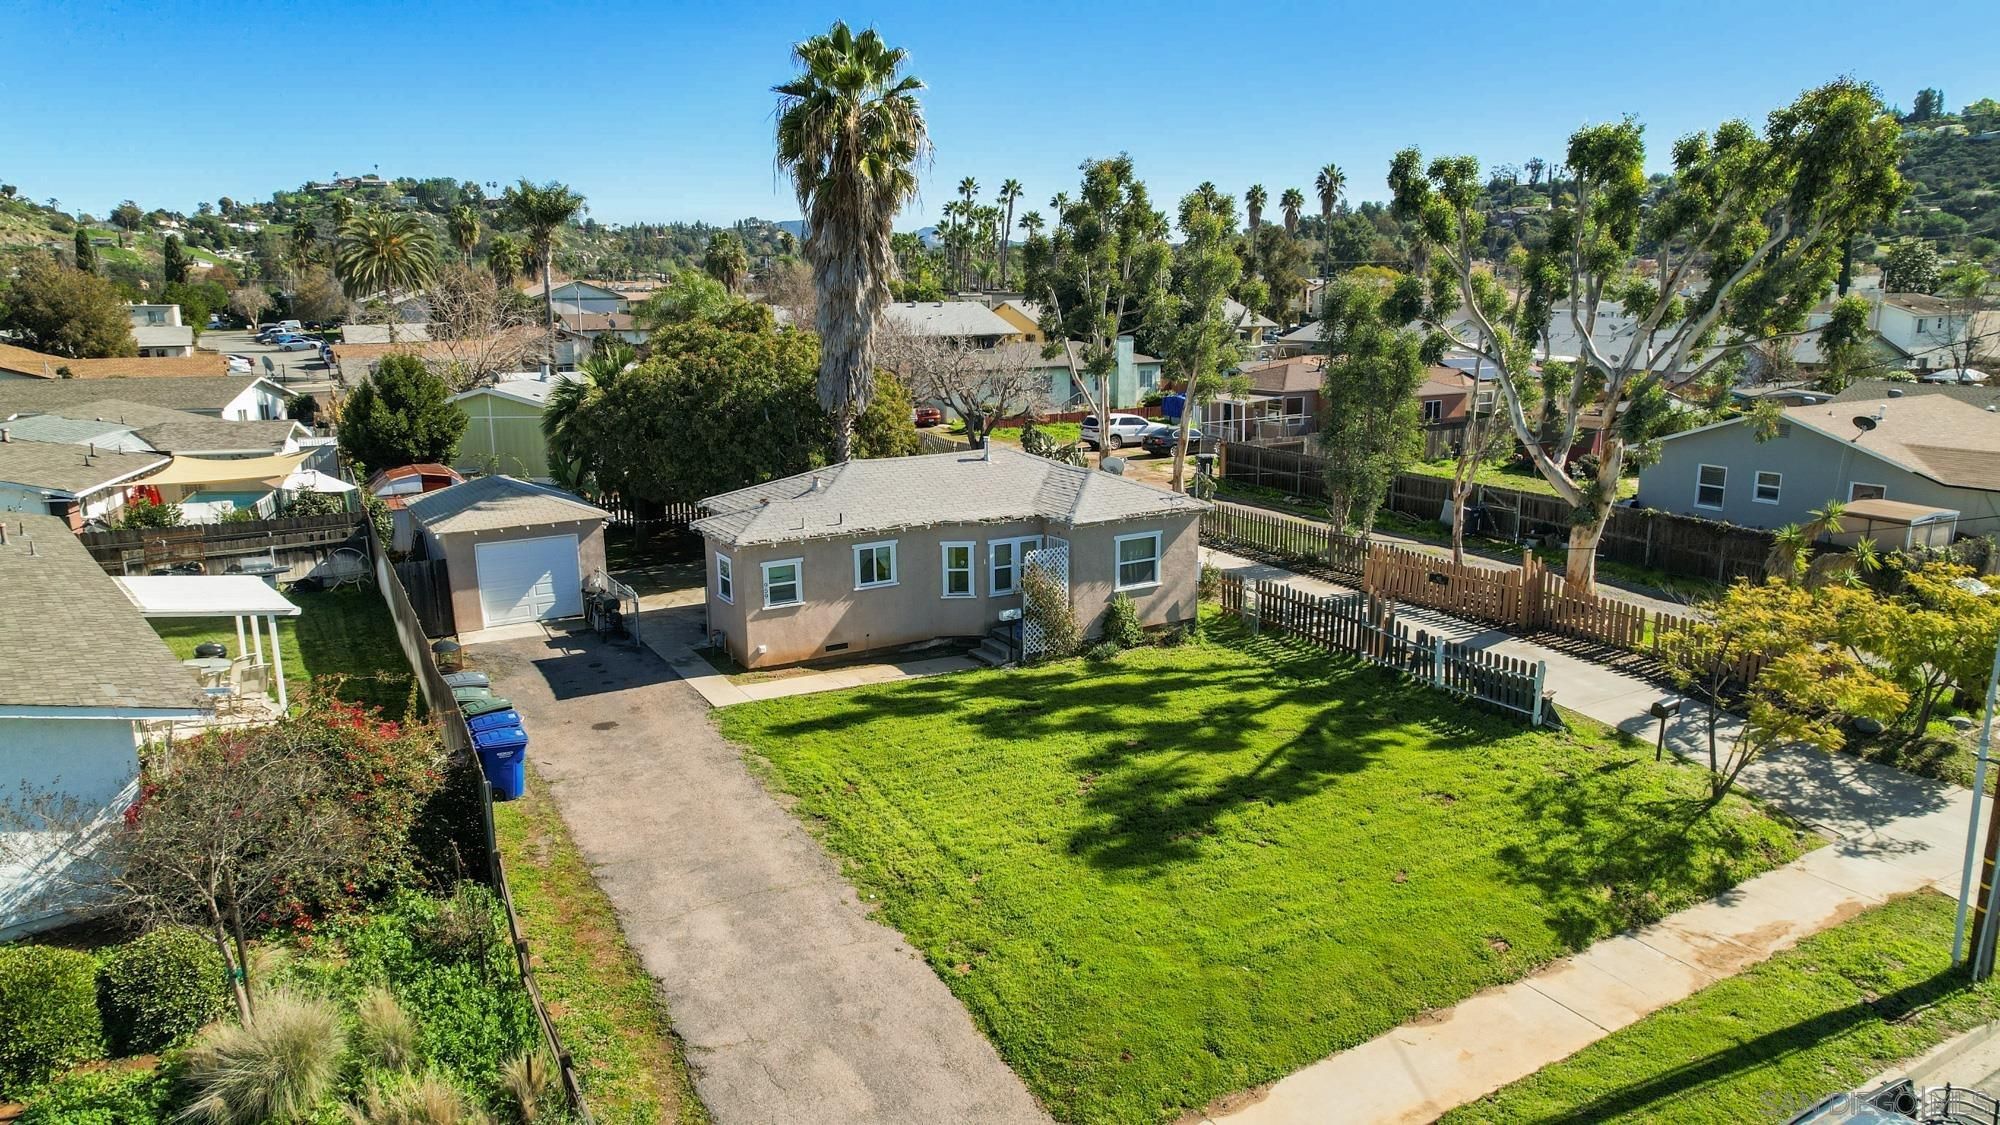 Main Photo: EL CAJON House for sale : 2 bedrooms : 959 S Lincoln Ave.